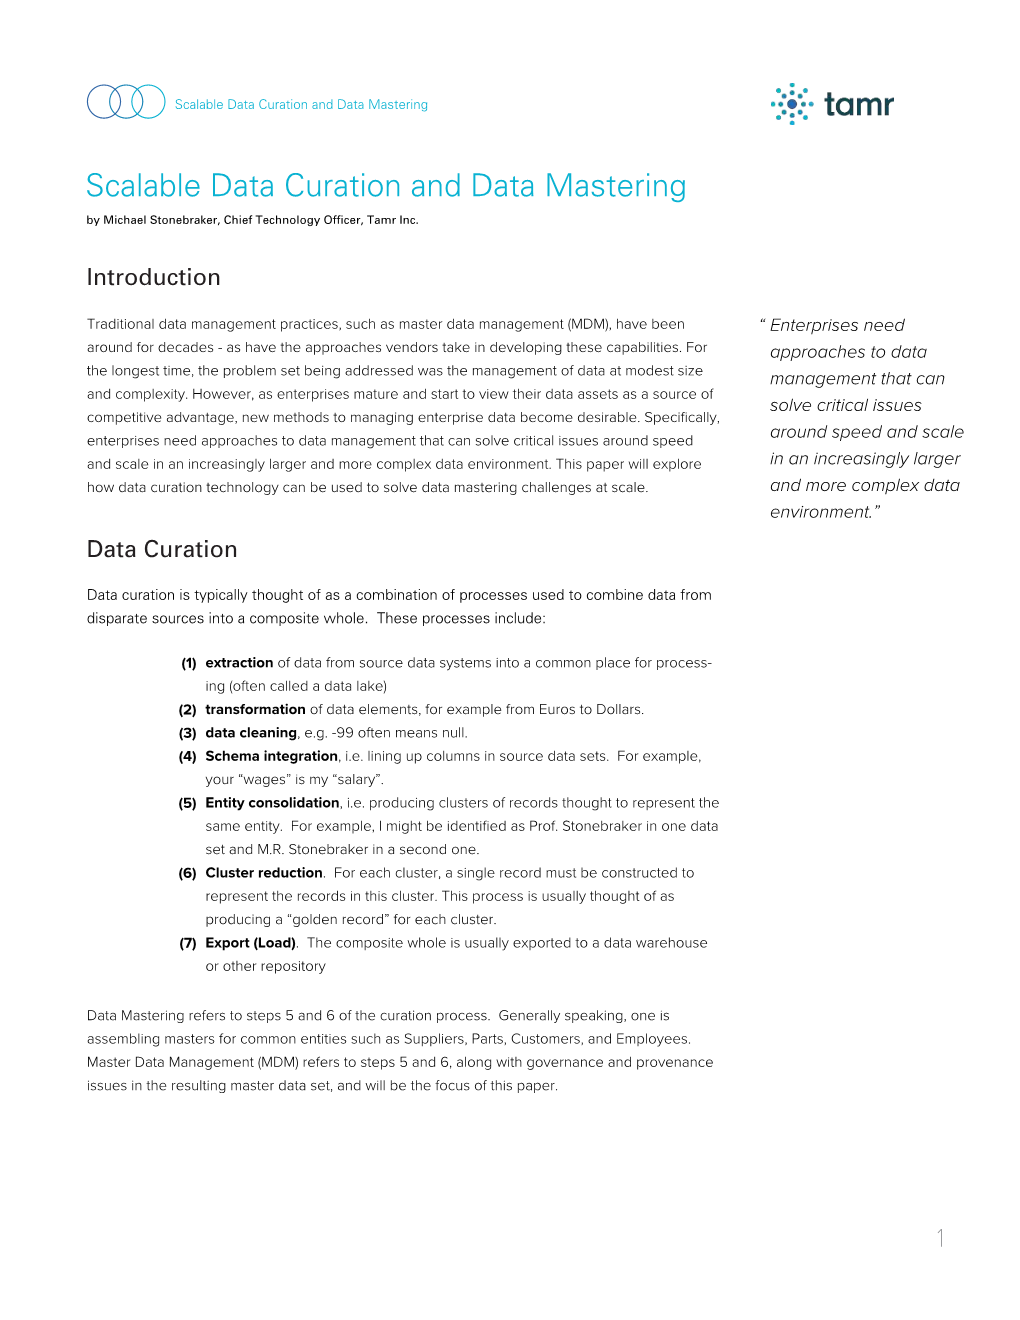 Scalable Data Curation and Data Mastering